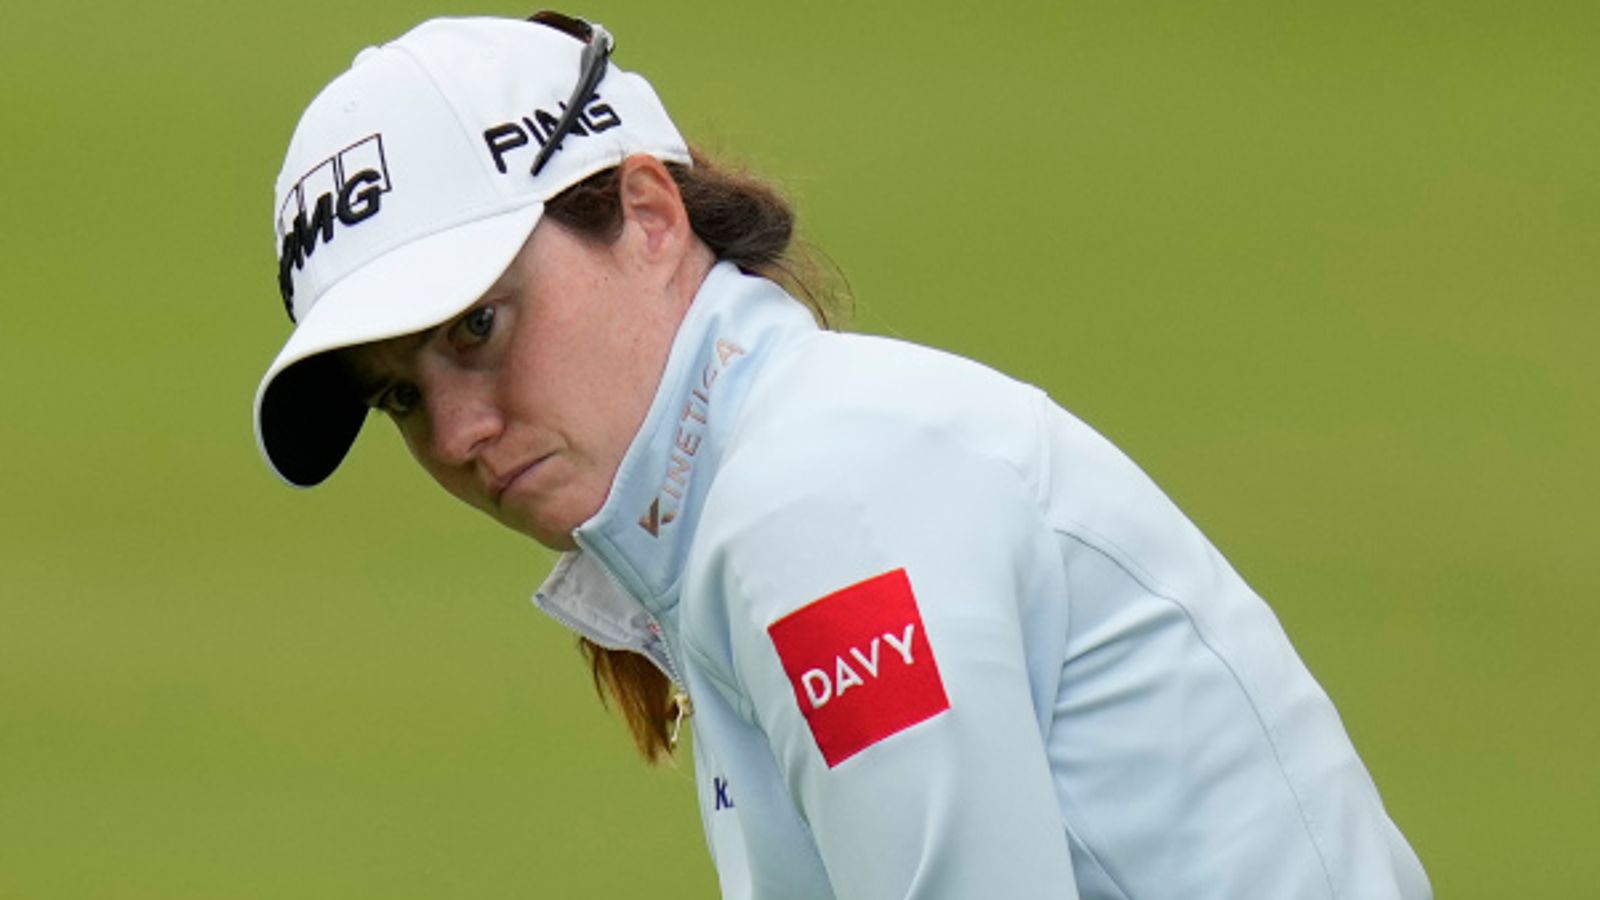 Womens PGA Championship Irelands Leona Maguire starts strongly as Lee-Anne Pace leads Golf News Sky Sports